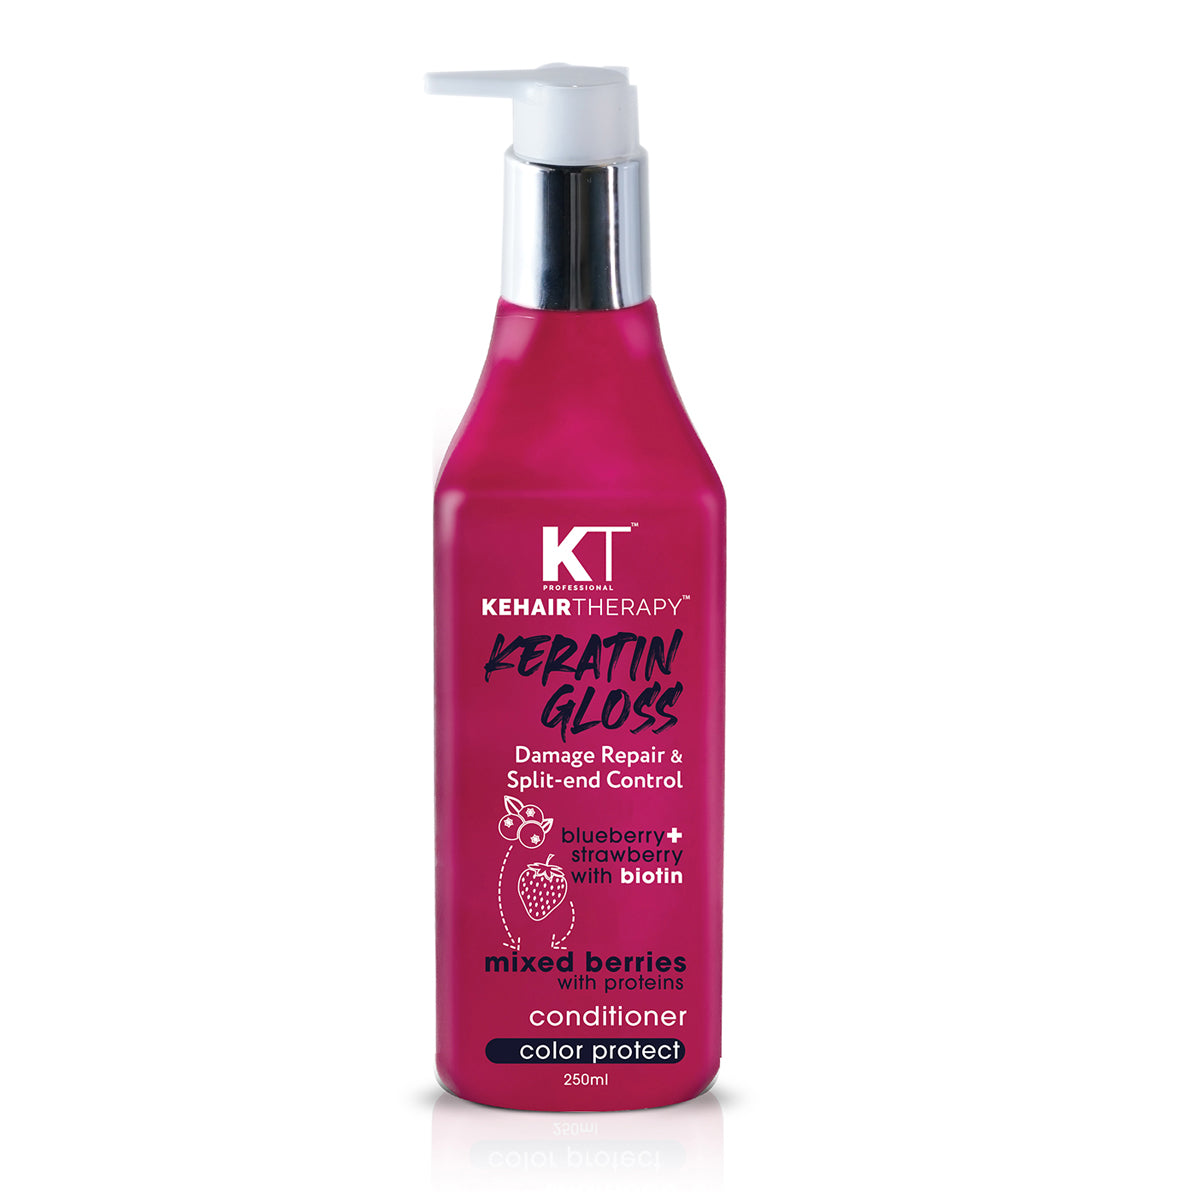 KT Professional Keratin Gloss Damage Repair &amp; Split End Control Conditioner |Sulfate Free|Paraben Free 250ml